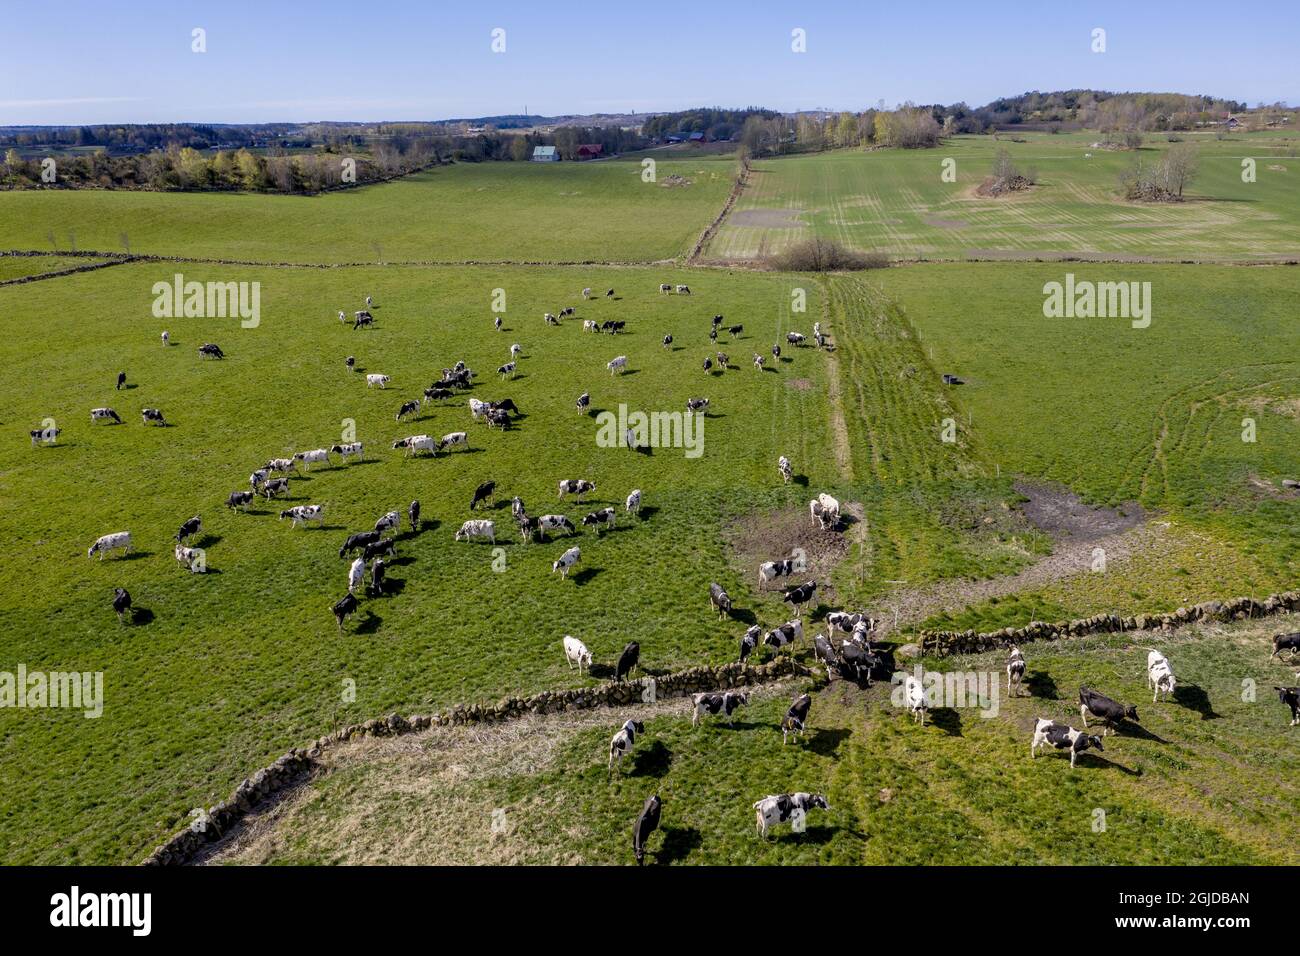 Page 9 - Varberg High Resolution Stock Photography and Images - Alamy